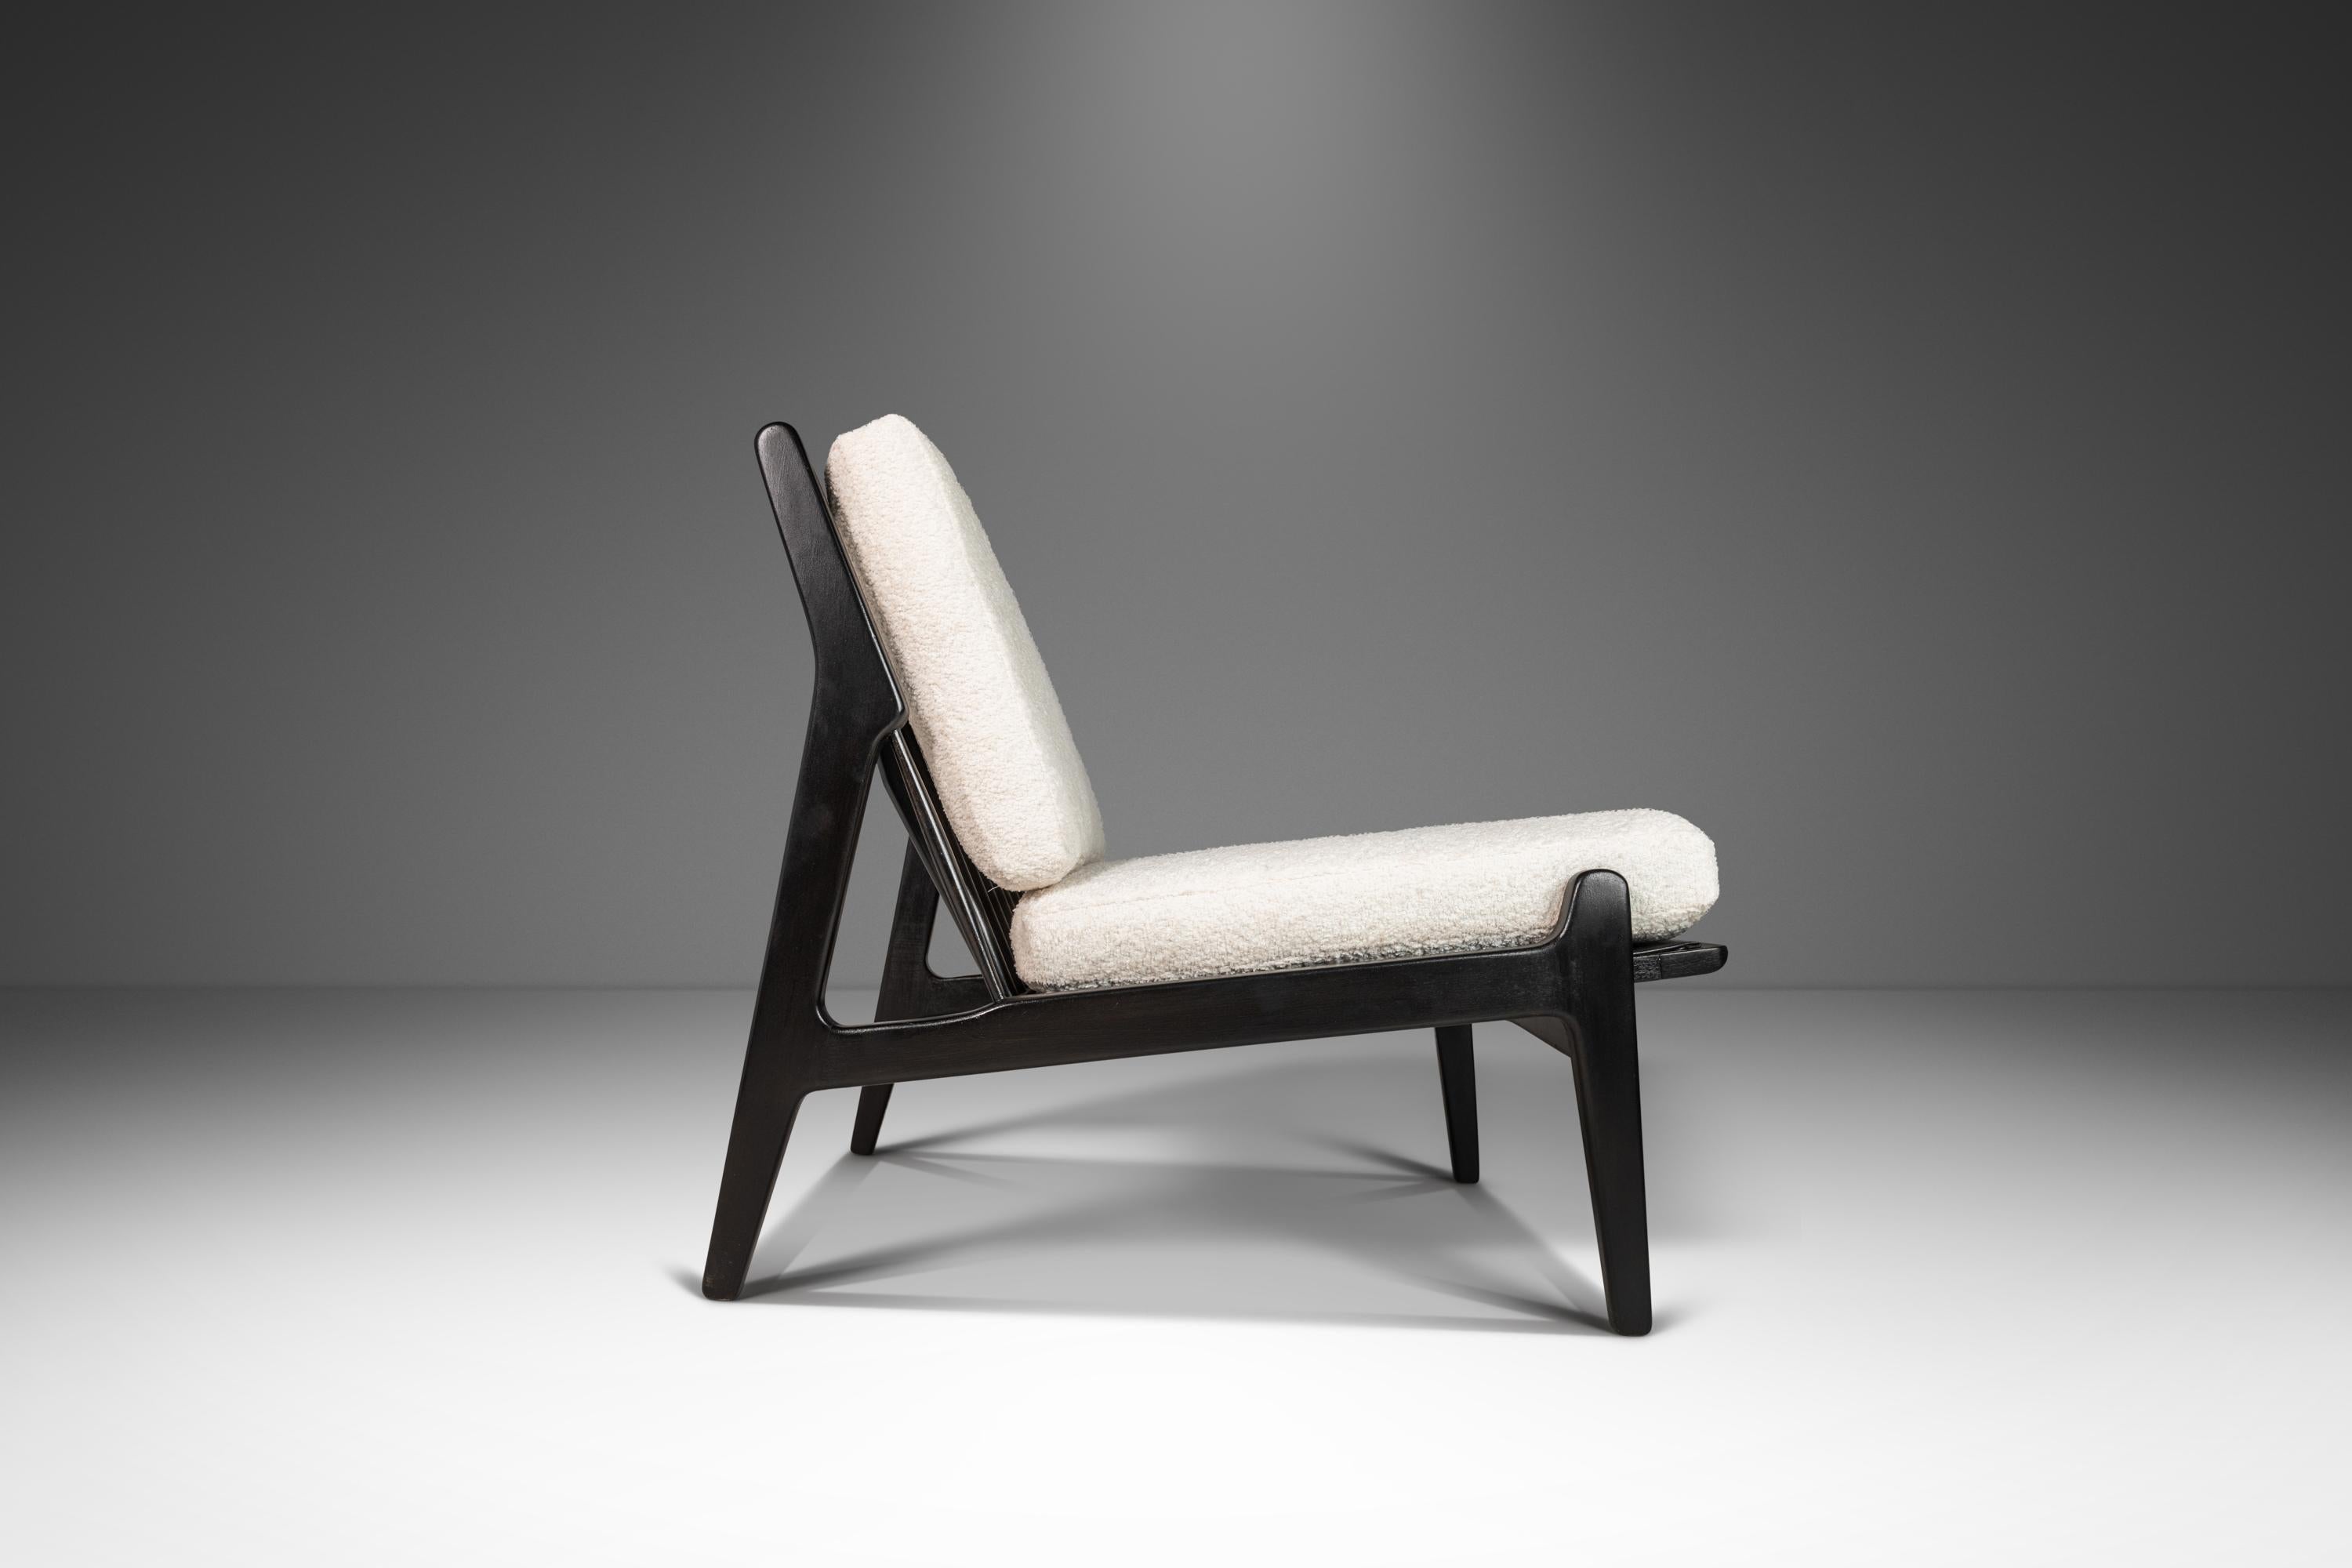 Set of Two Ebonized Lounge Chairs in Bouclé by Ib Kofod Larsen for Selig, 1950s For Sale 3